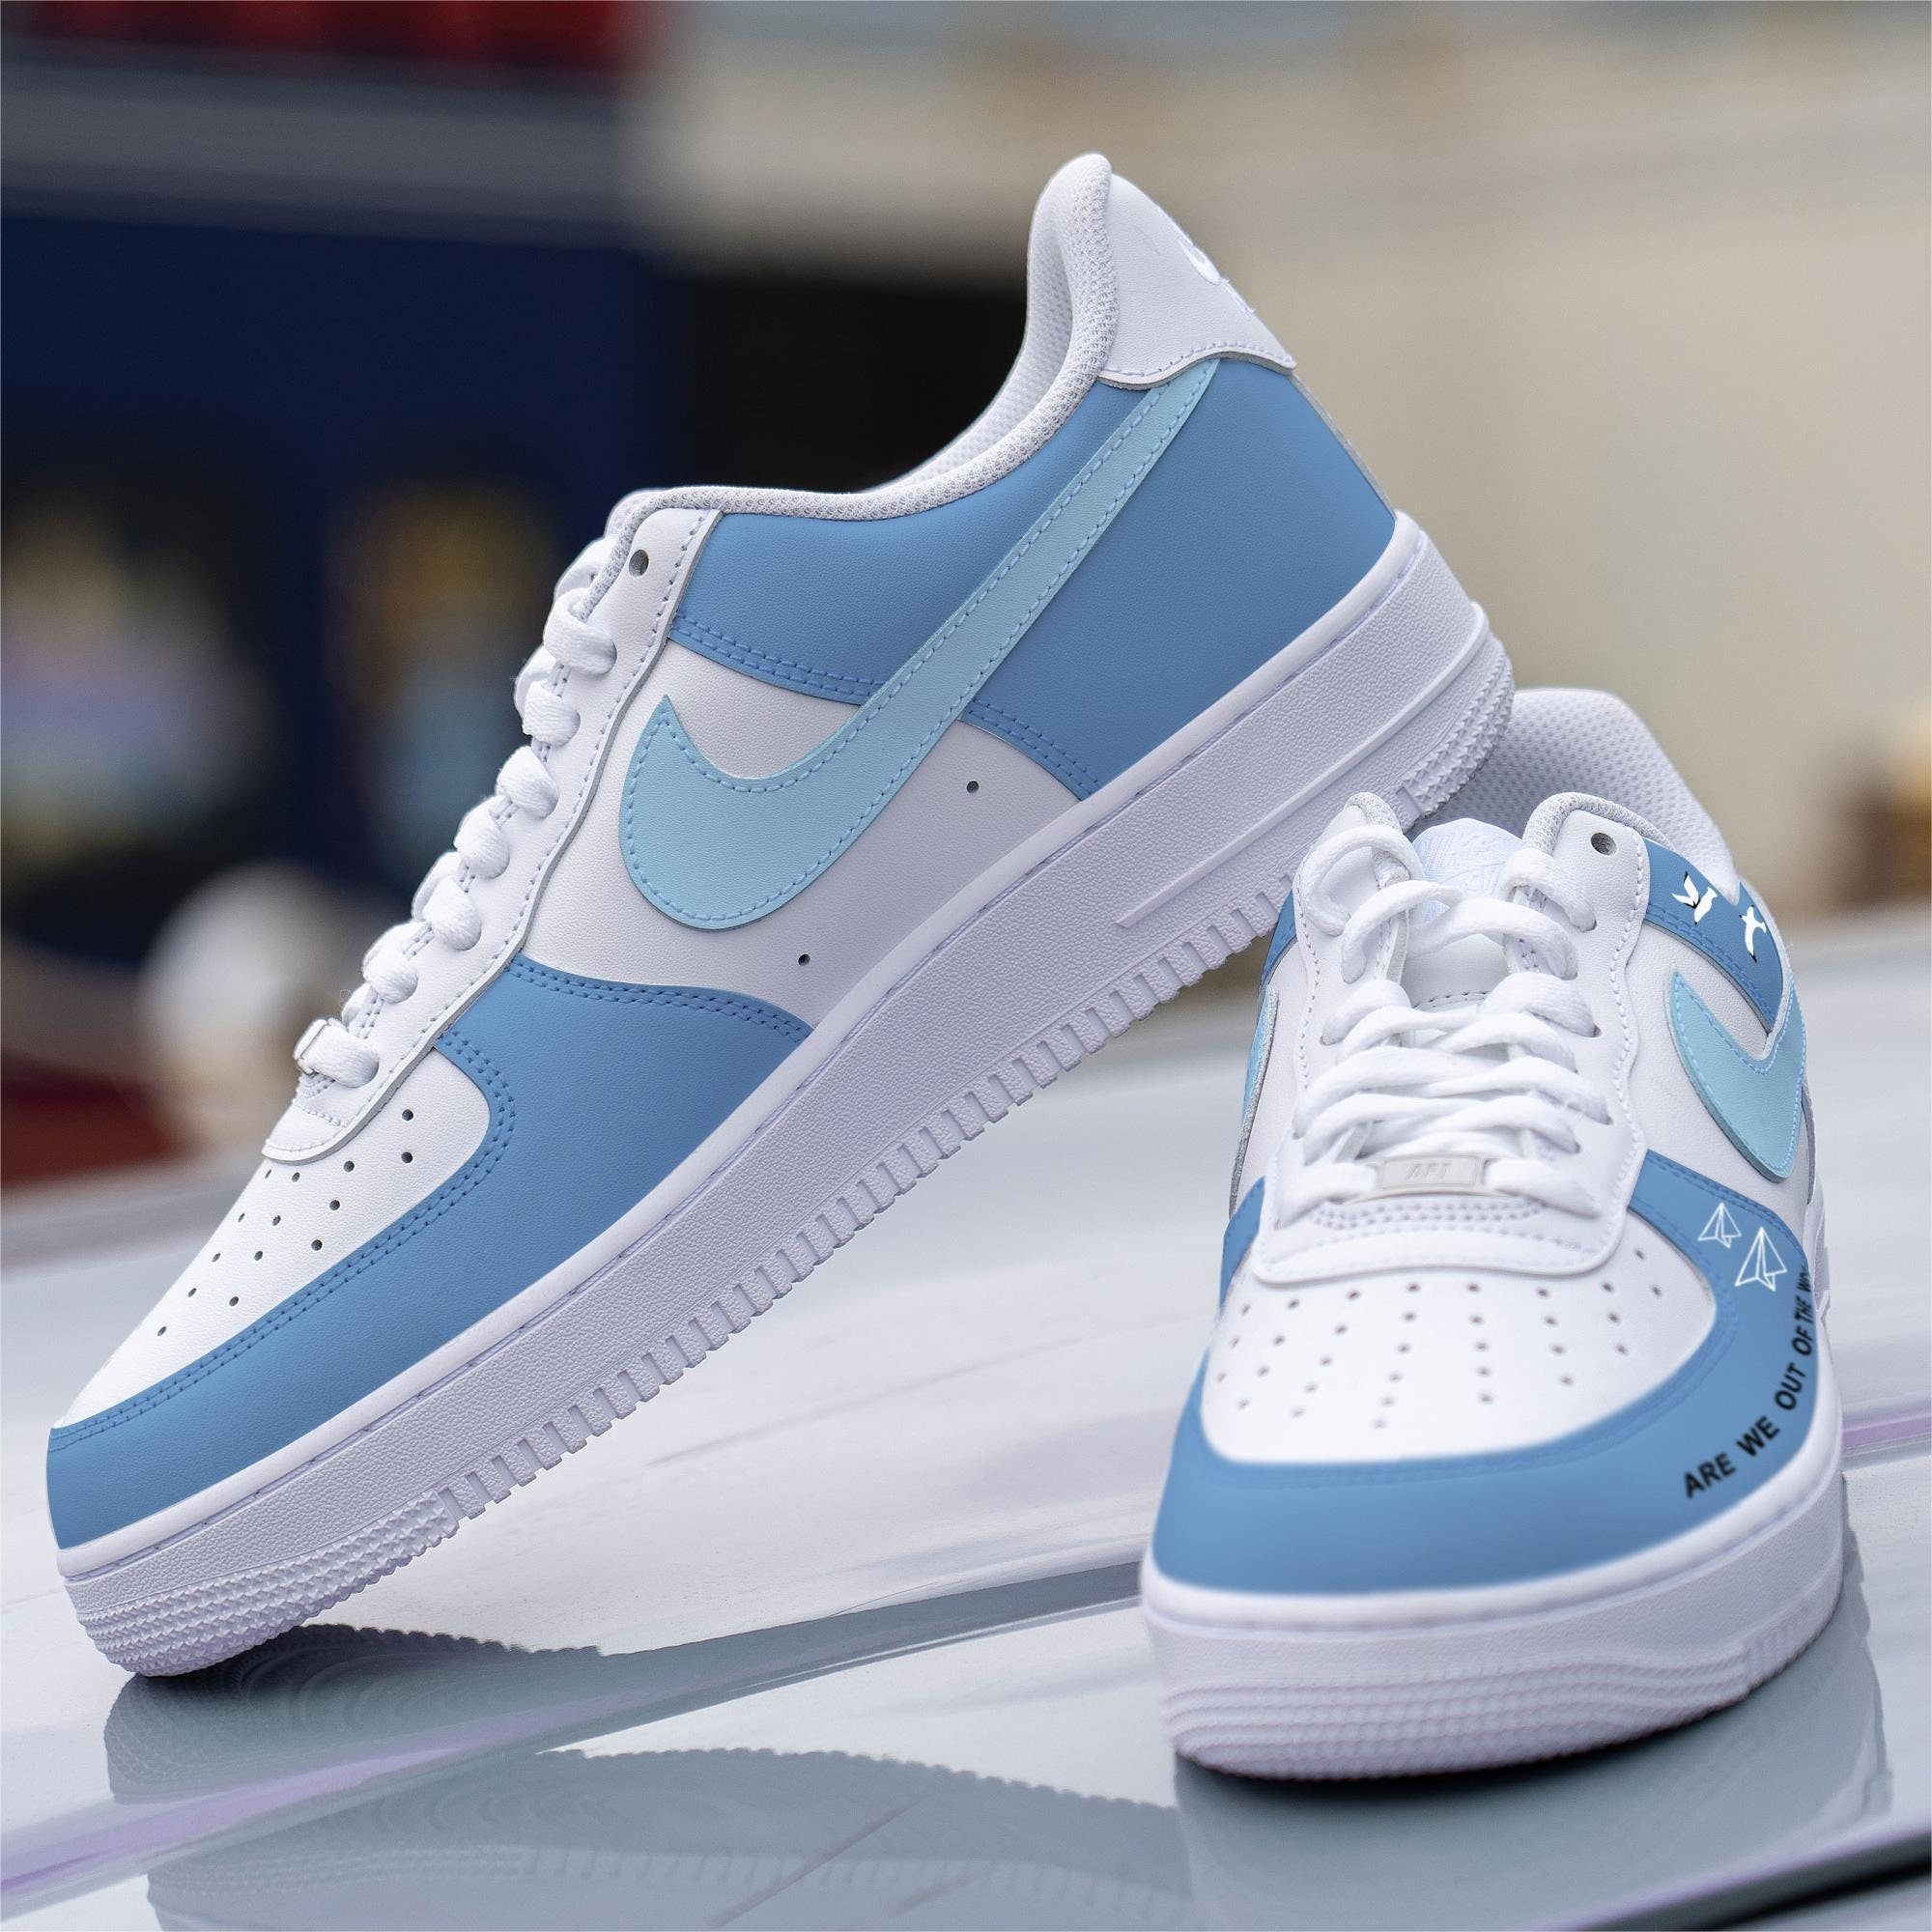 Custom Taylor's Nike Air Force 1 Shoes Blue